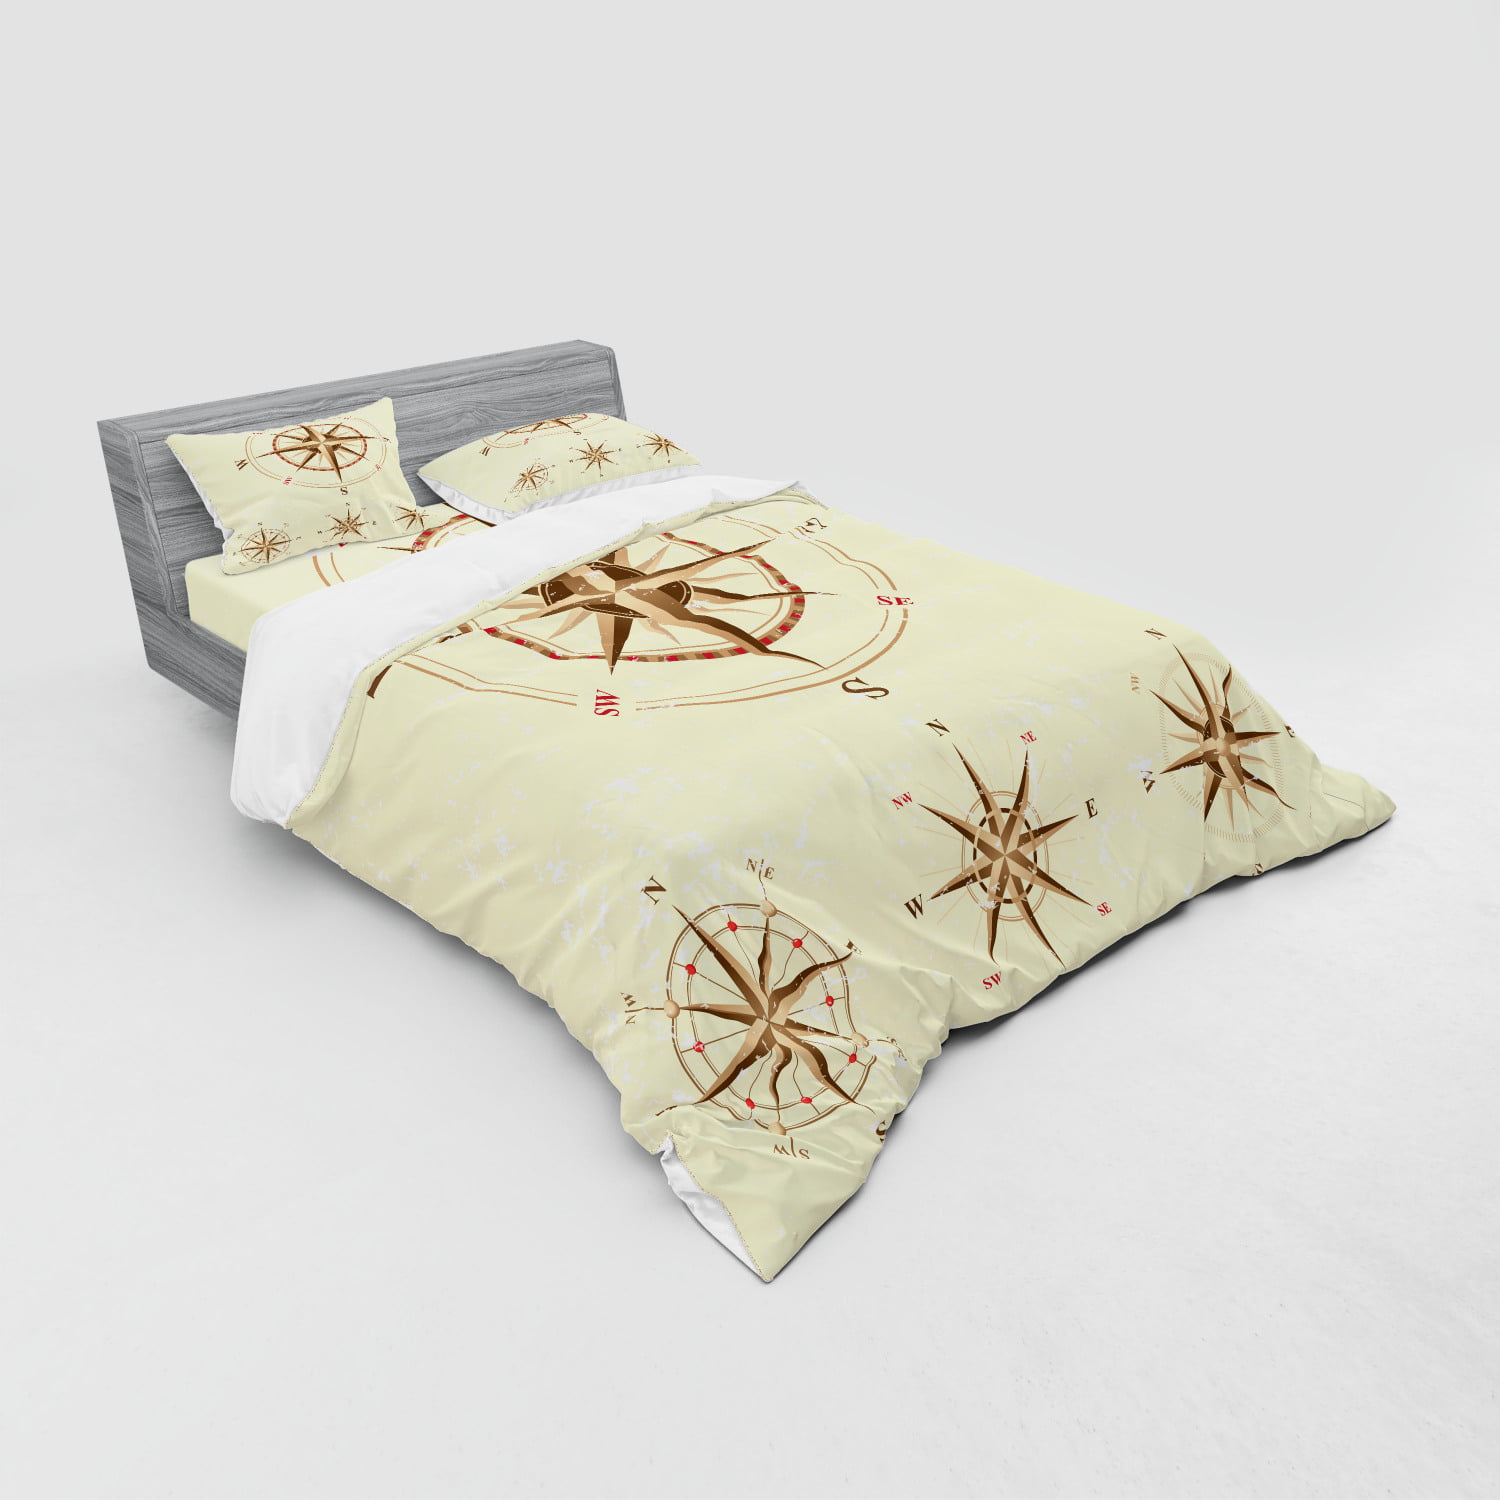 LEO BON Compass Duvet Cover Set Full Size Four Different Compasses in Retro Colors Discovery Equipment Where Nautical Marine Floral Duvet Cover and Pillow Shams Bed Set Beige Tan